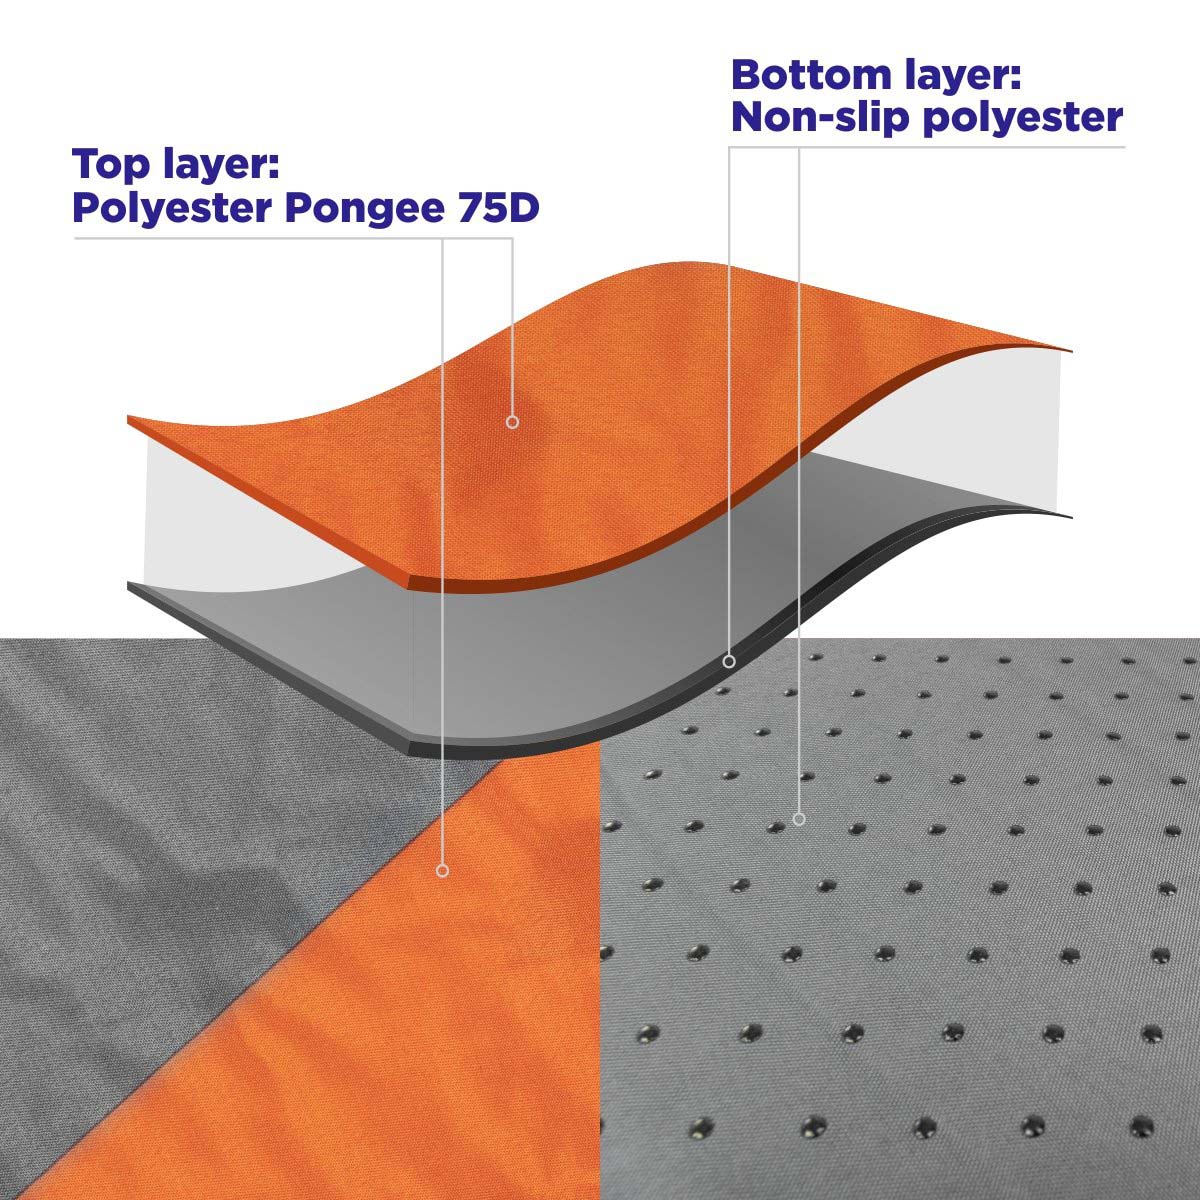 Orange Self Inflating Sleeping Pad for Camping and Outdoor made of Polyester Pongee 75D and Non-Slip Polyester